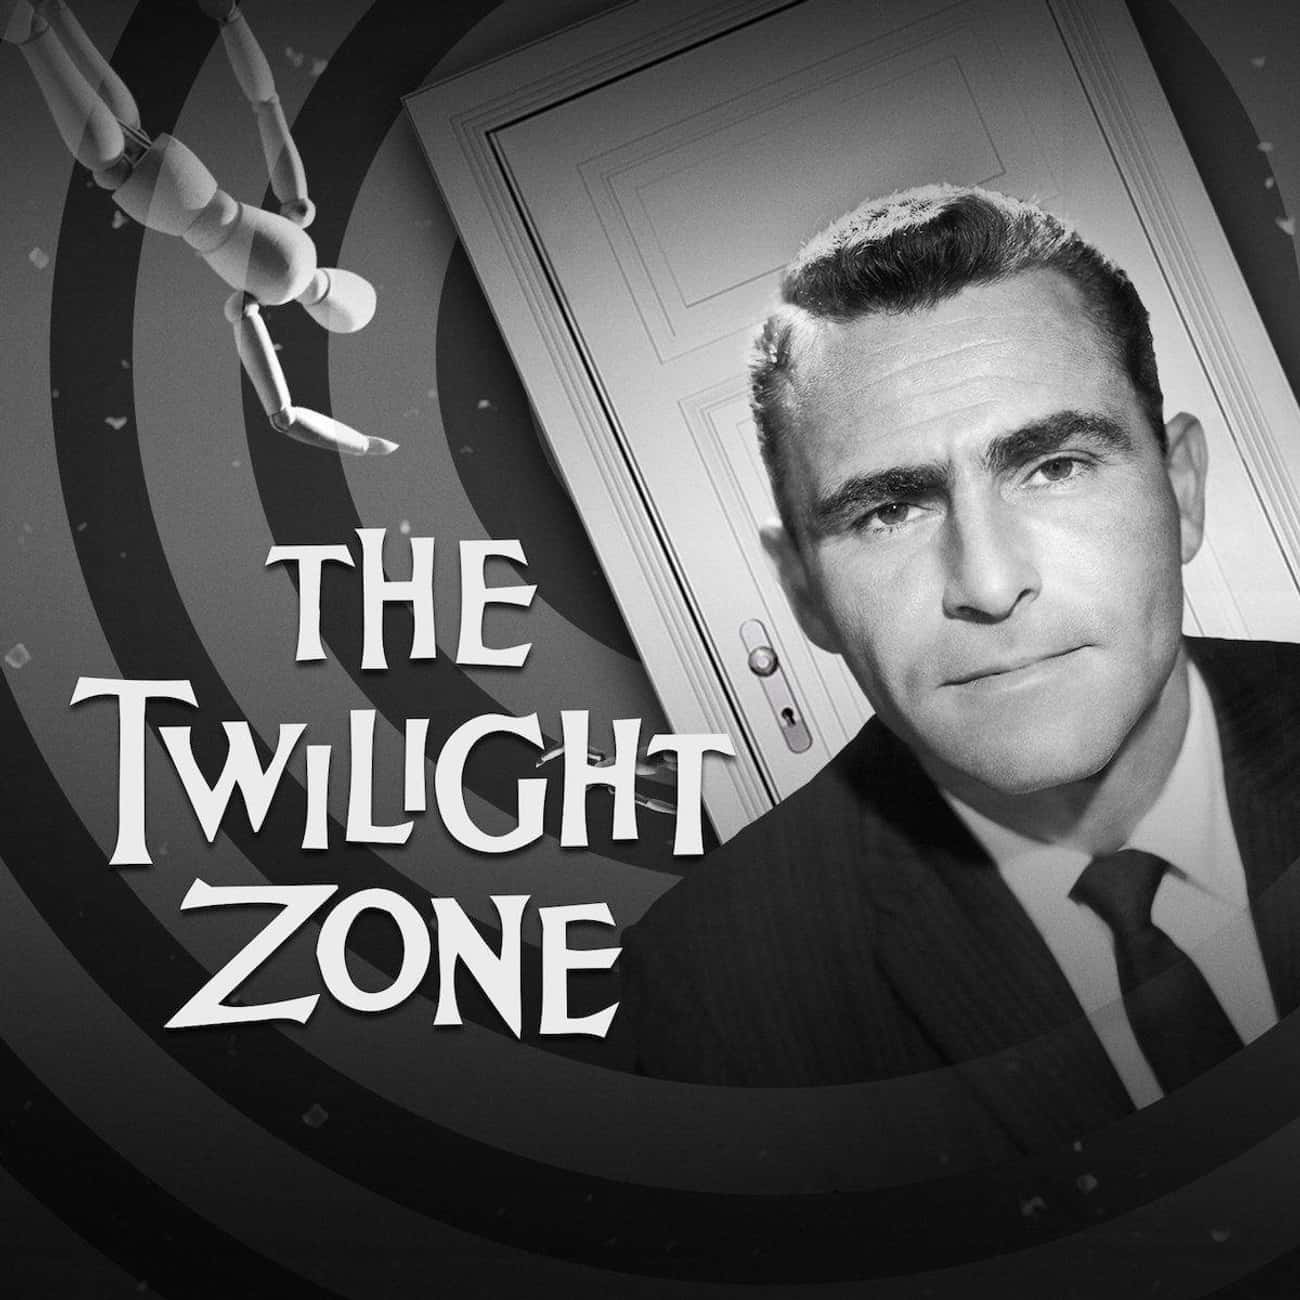 All 'The Twilight Zone' Show & Movies, Ranked By Fans